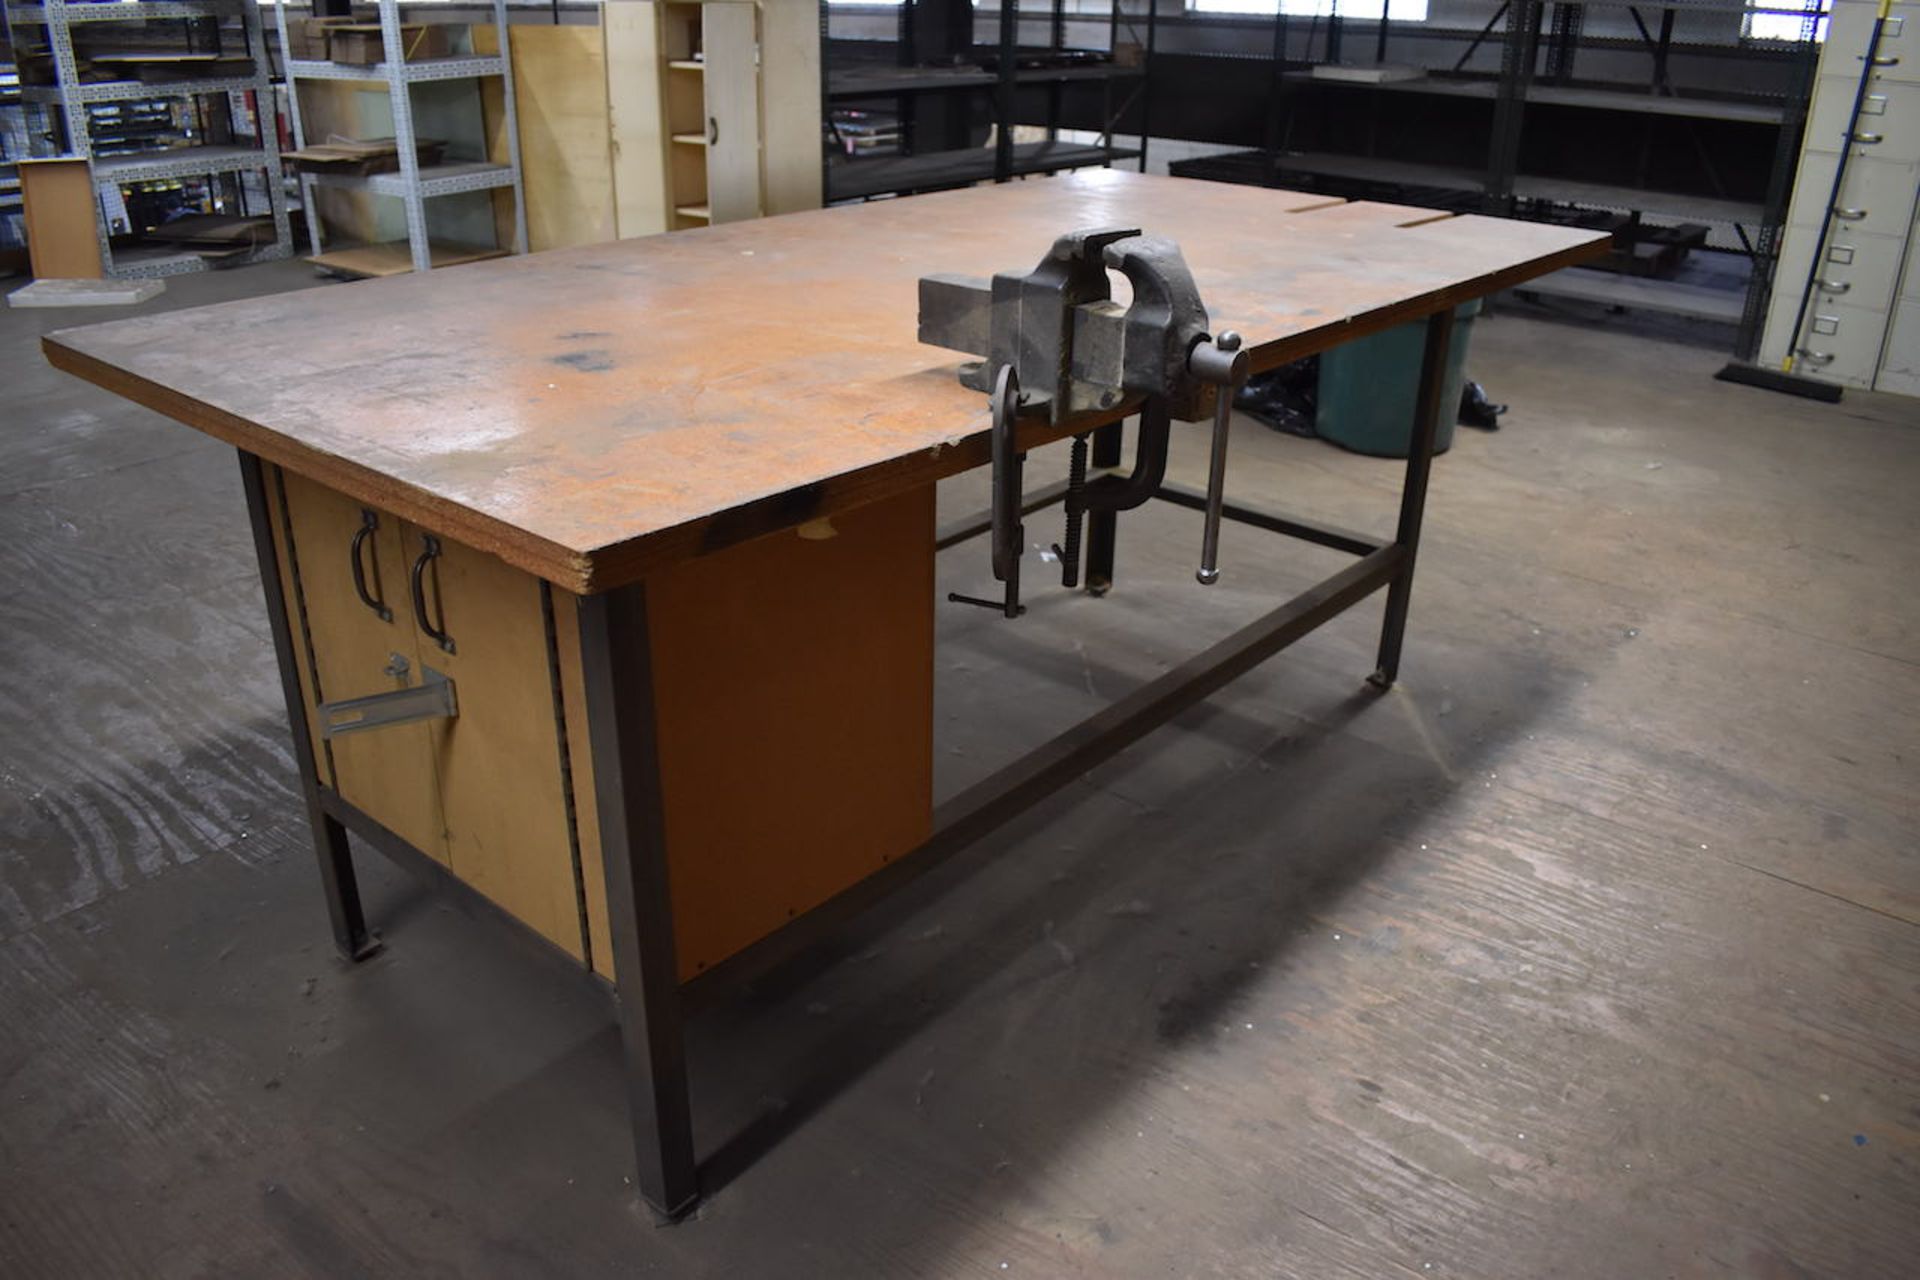 ASSORTED WORK BENCHES, FILE CABINETS, METAL SHELVING AND STORAGE CABINETS IN UPSTAIRS MEZZANINE. ( - Image 3 of 9